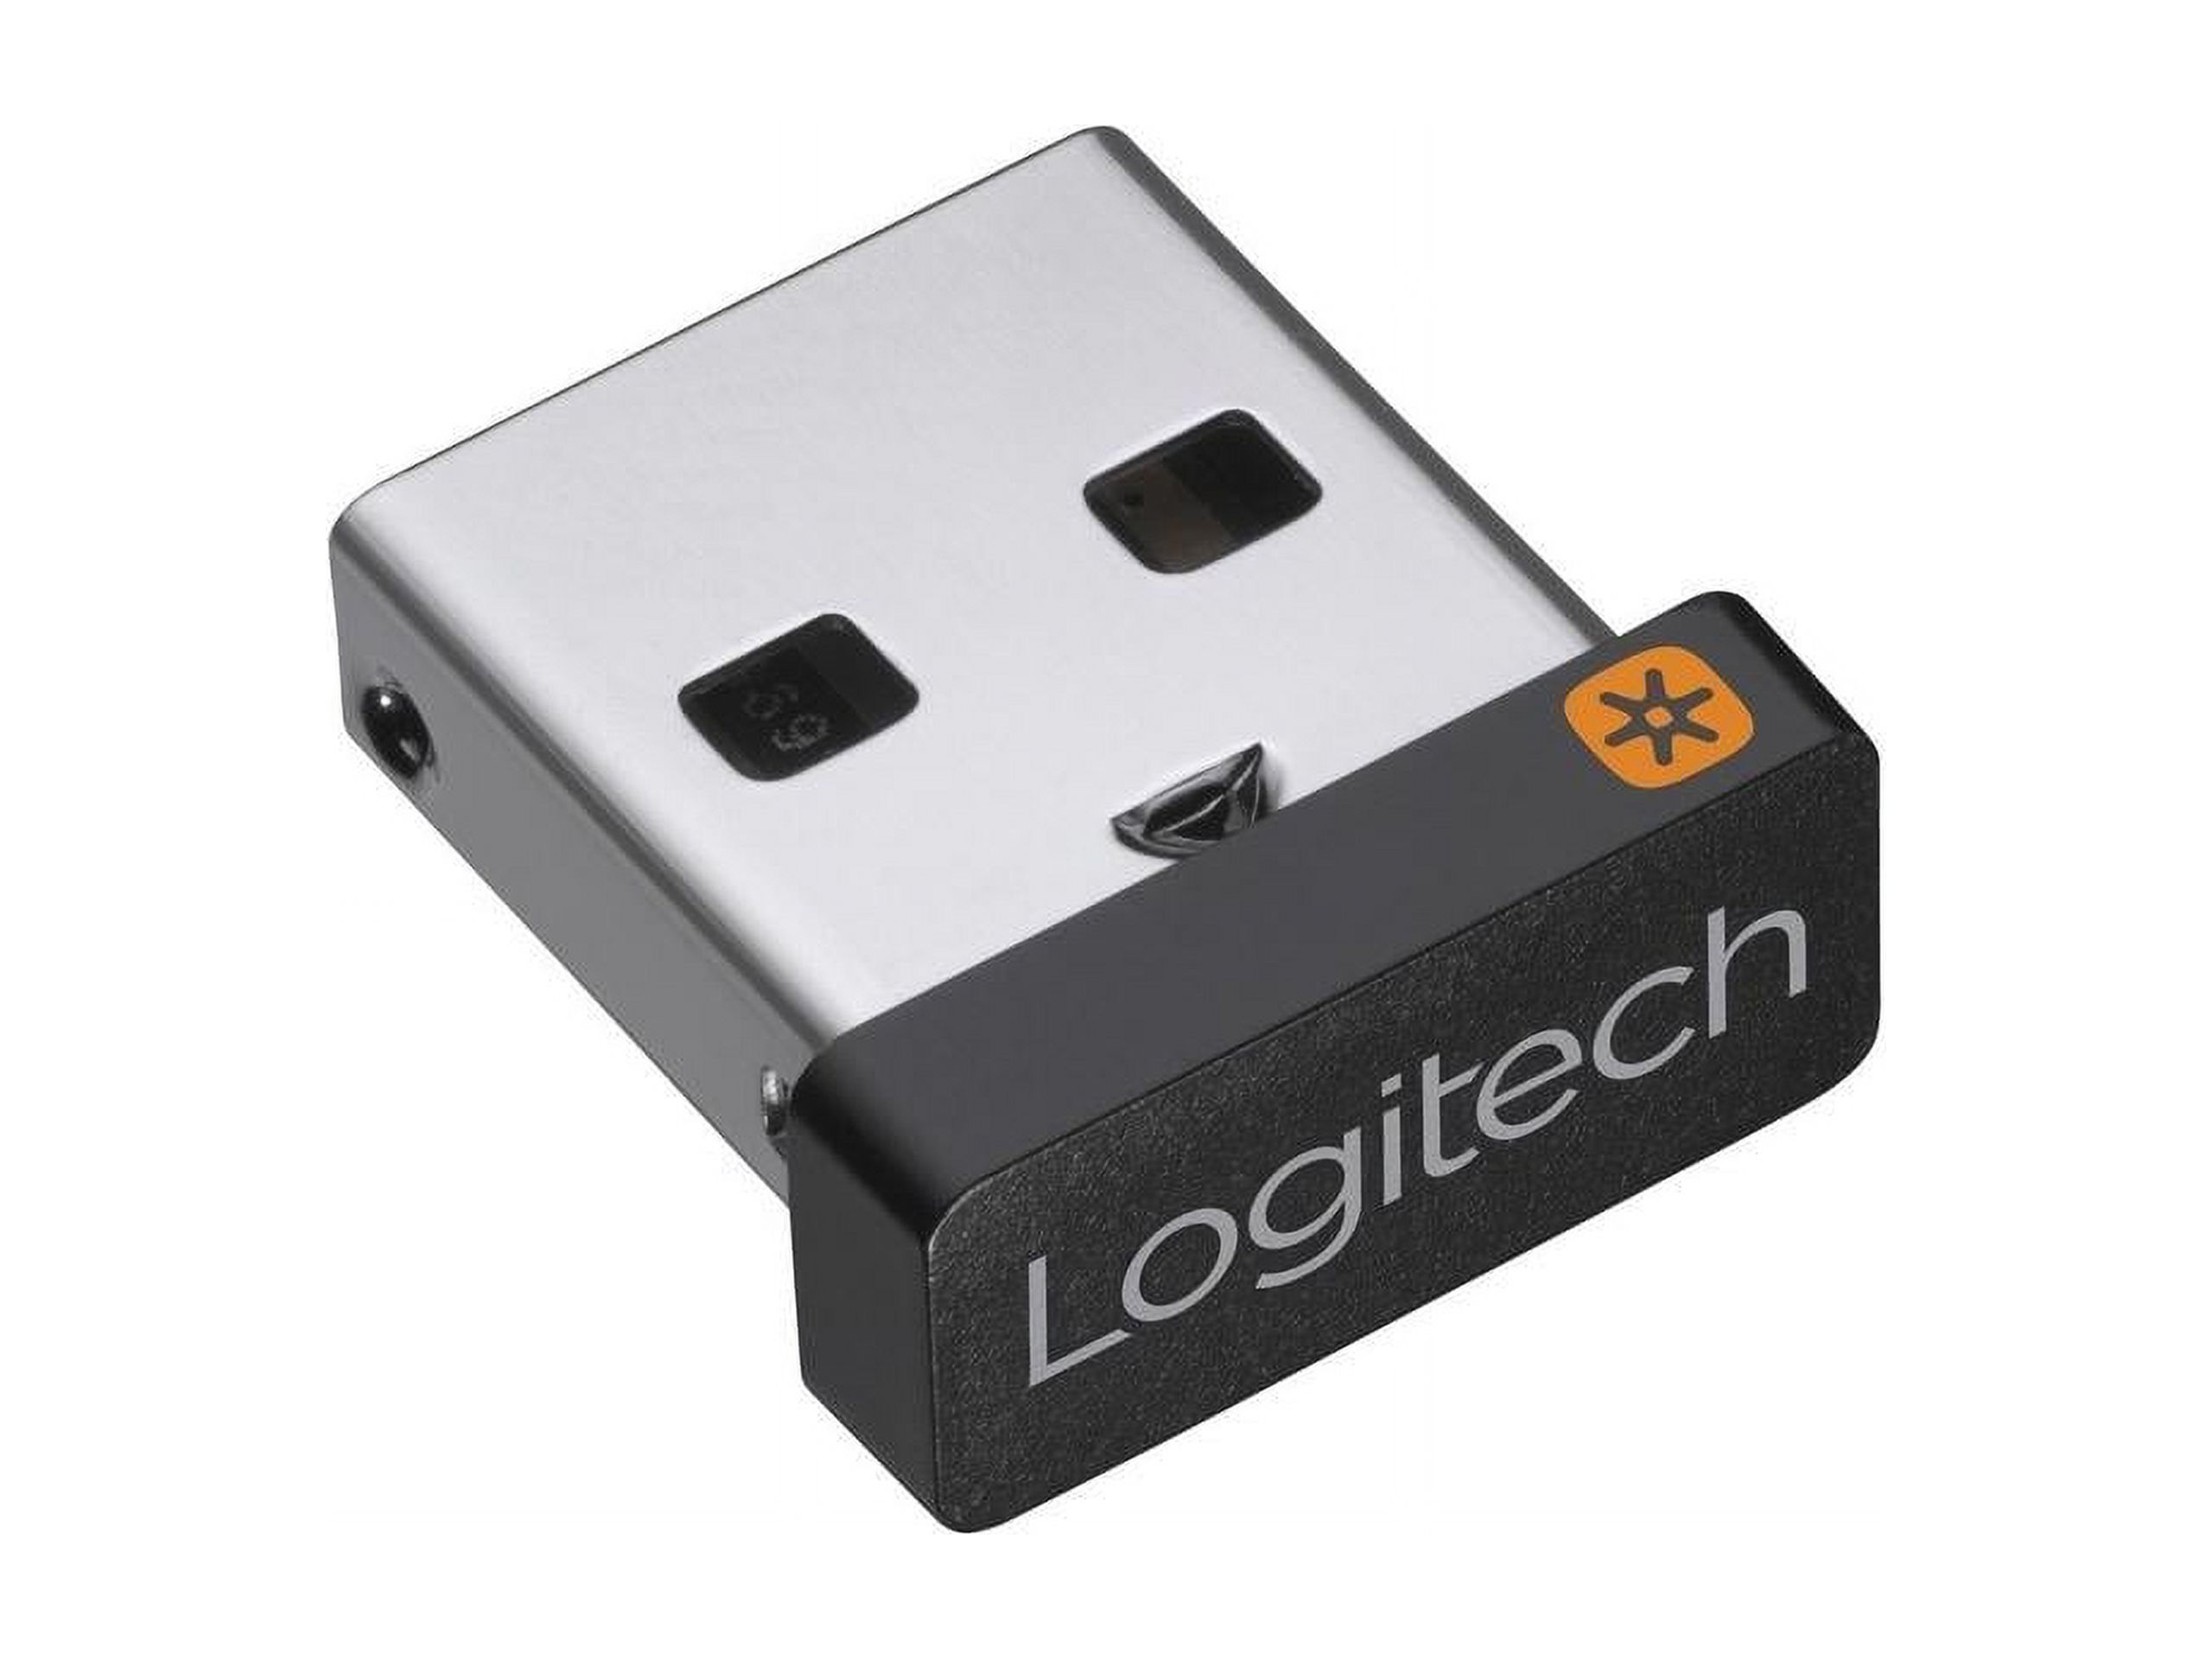 Logitech Wireless Mouse / Keyboard USB Unifying Receiver - image 3 of 20